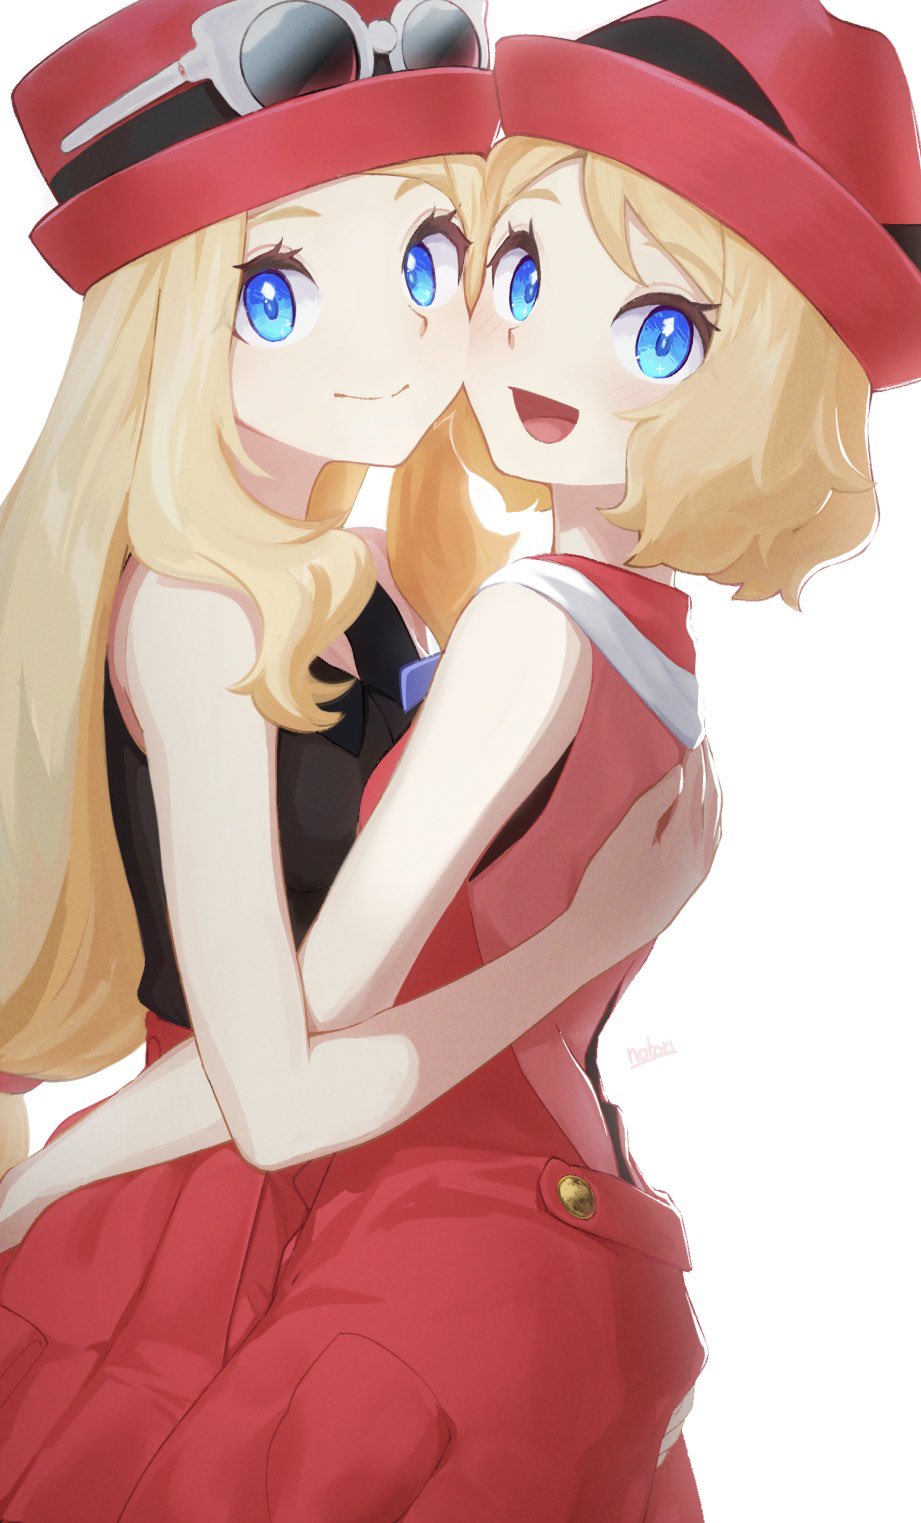 2girls :d bangs blonde_hair blue_eyes closed_mouth commentary_request creatures_(company) cute dual_persona eyelashes eyewear_on_headwear fedora game_freak hat highres hug looking_at_viewer multiple_girls multiple_persona nintendo notori_d olm_digital open_mouth pleated_skirt pokemon pokemon_(anime) pokemon_(game) pokemon_xy pokemon_xy_(anime) porkpie_hat red_headwear red_skirt ribbon serena_(pokemon) simple_background skirt sleeveless smile sunglasses the_pokemon_company tongue white_background yuri